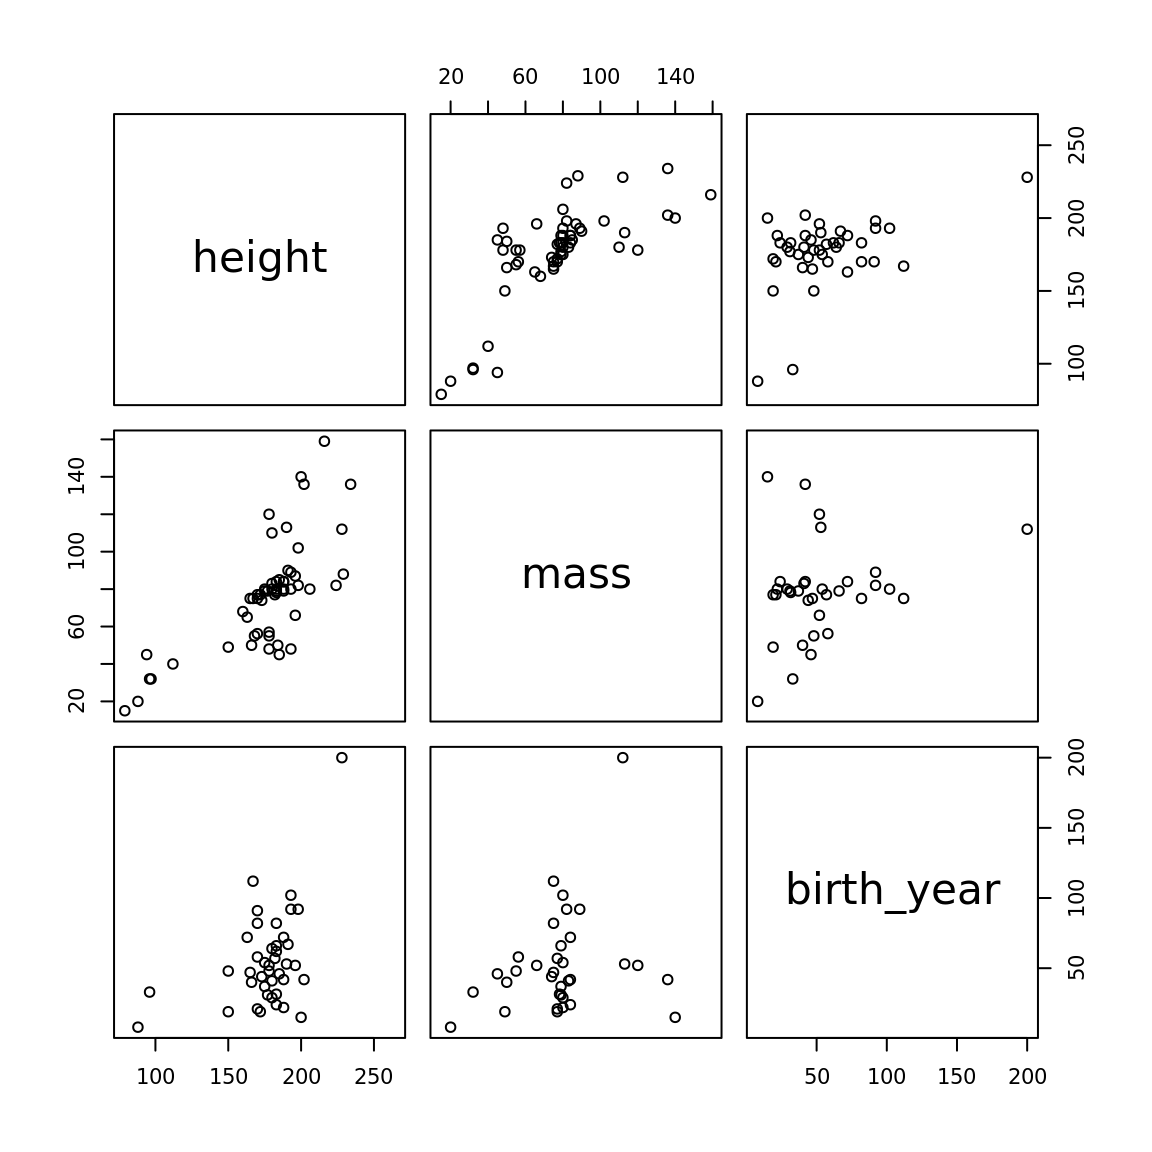 Pairwise correlations for the starwars dataset after removing outlying mass and birth\_year values.